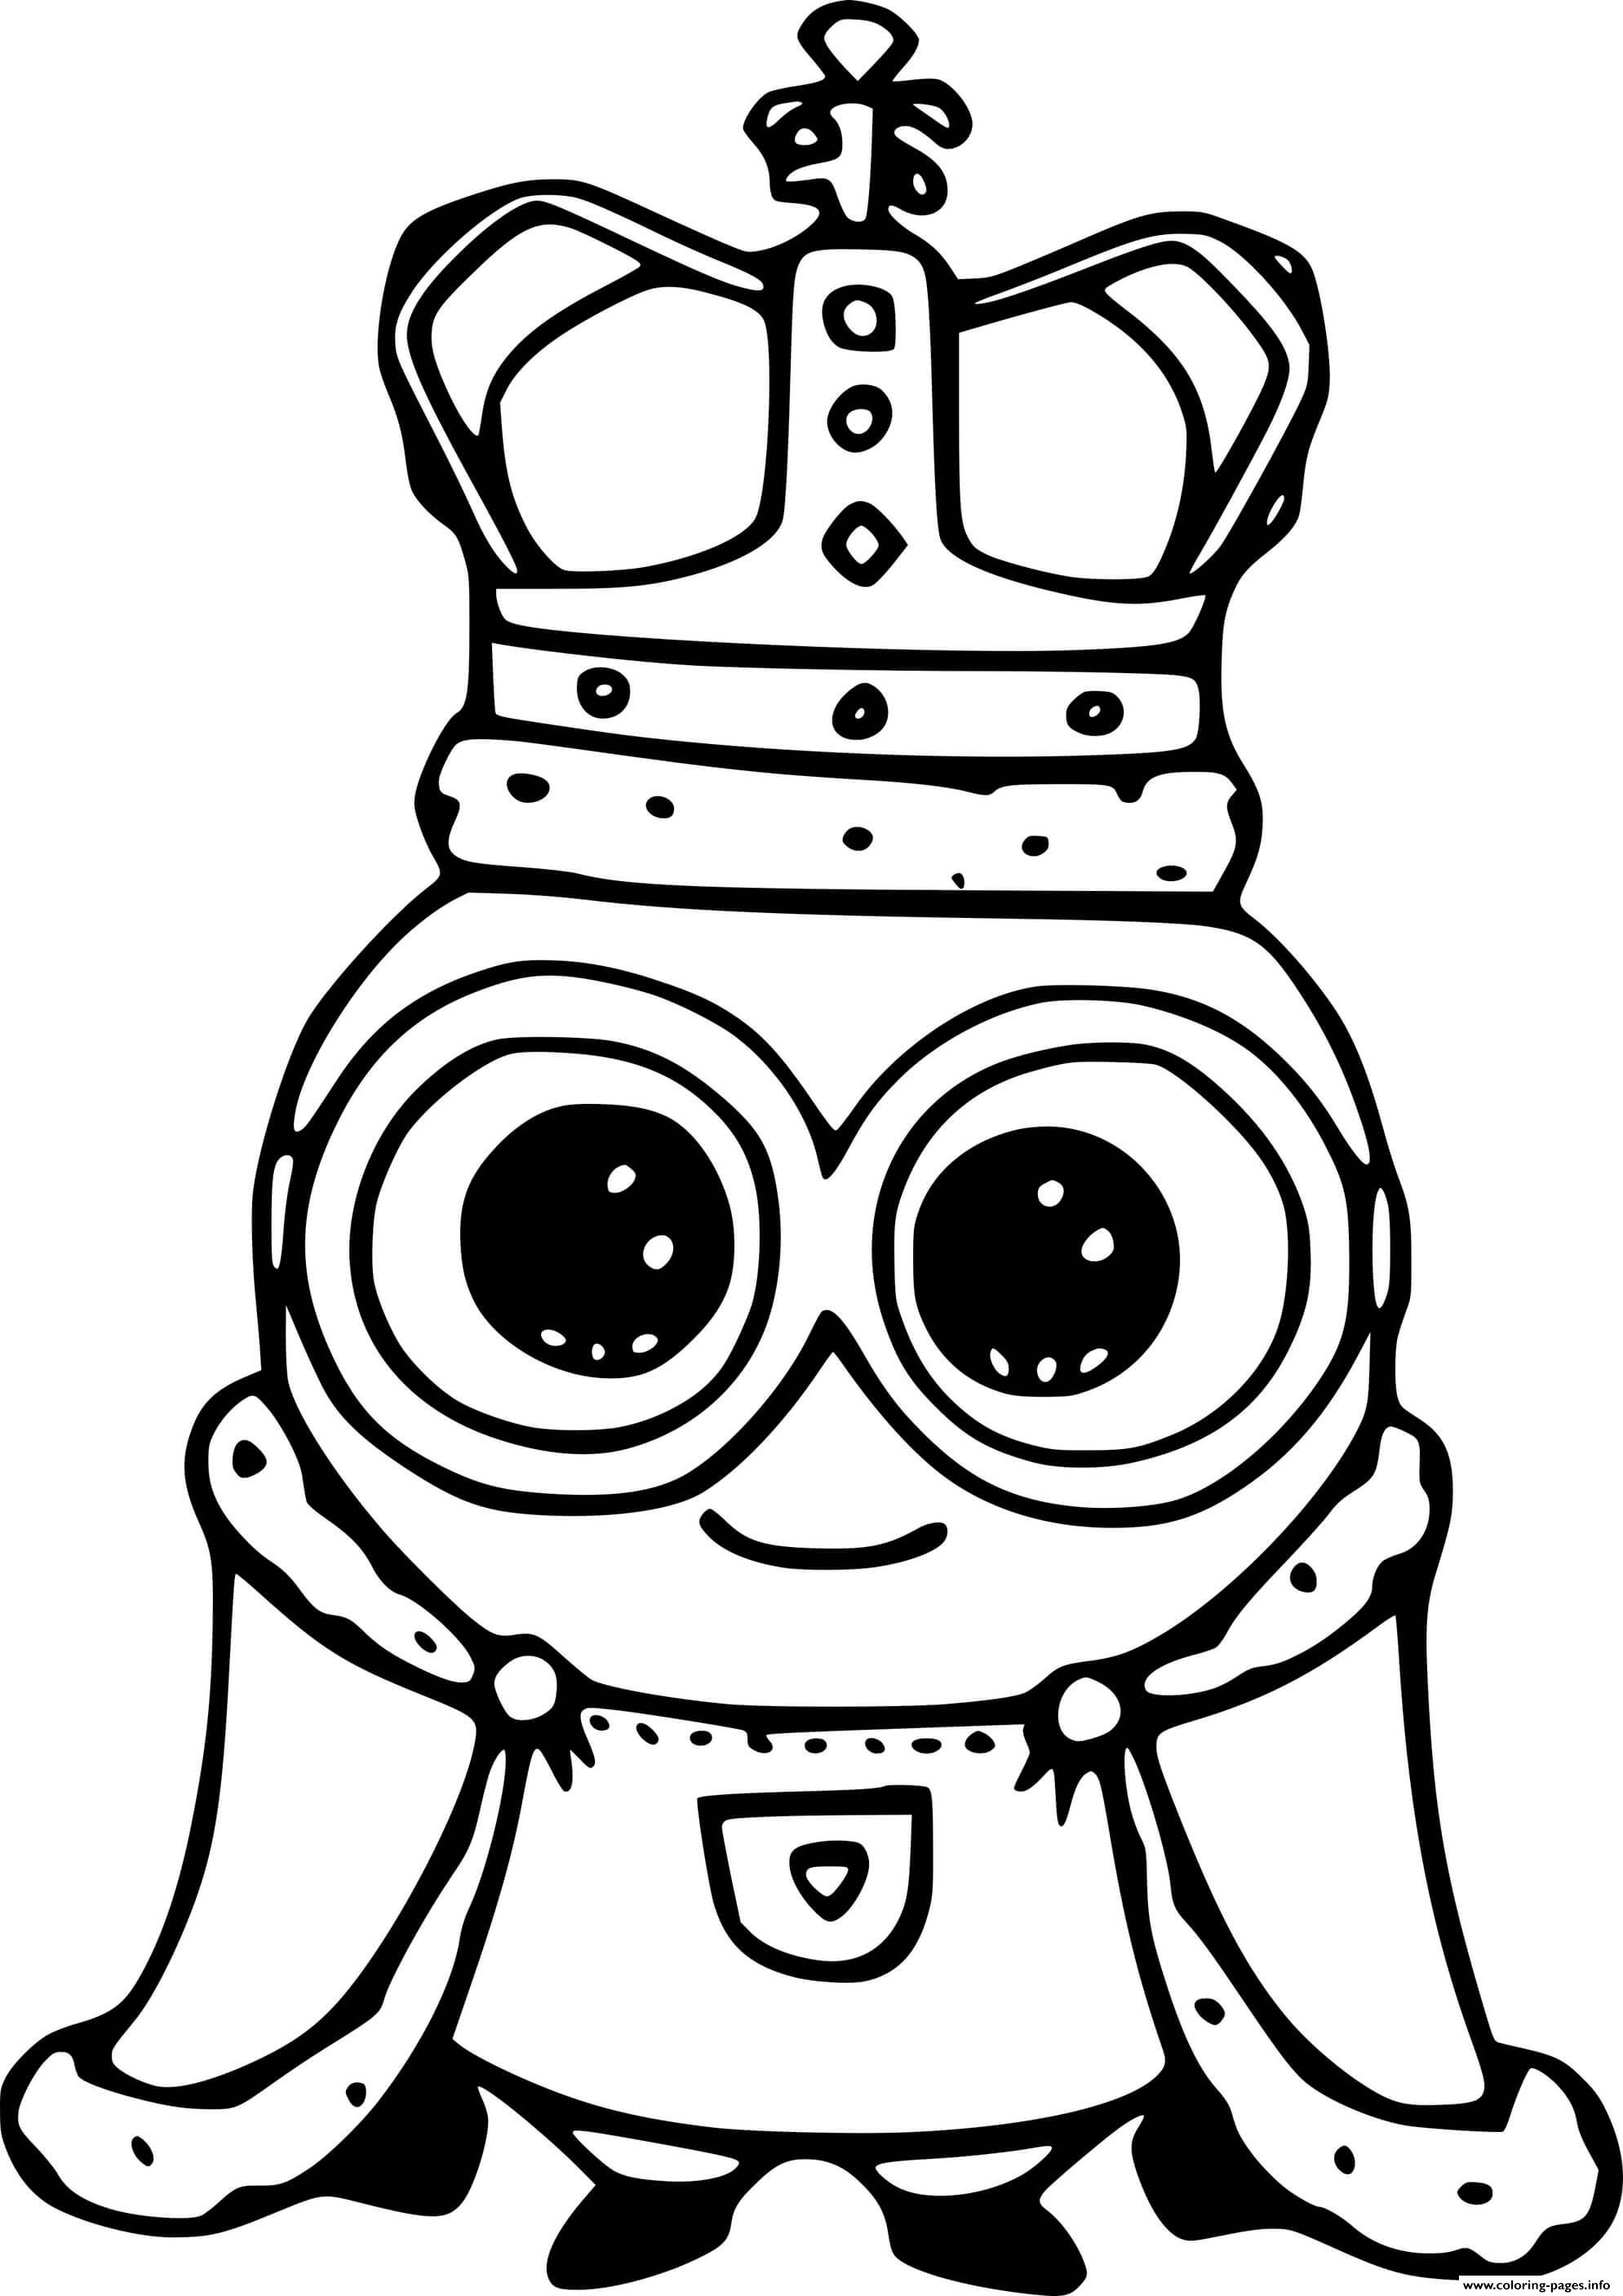 Minion With The Crown coloring